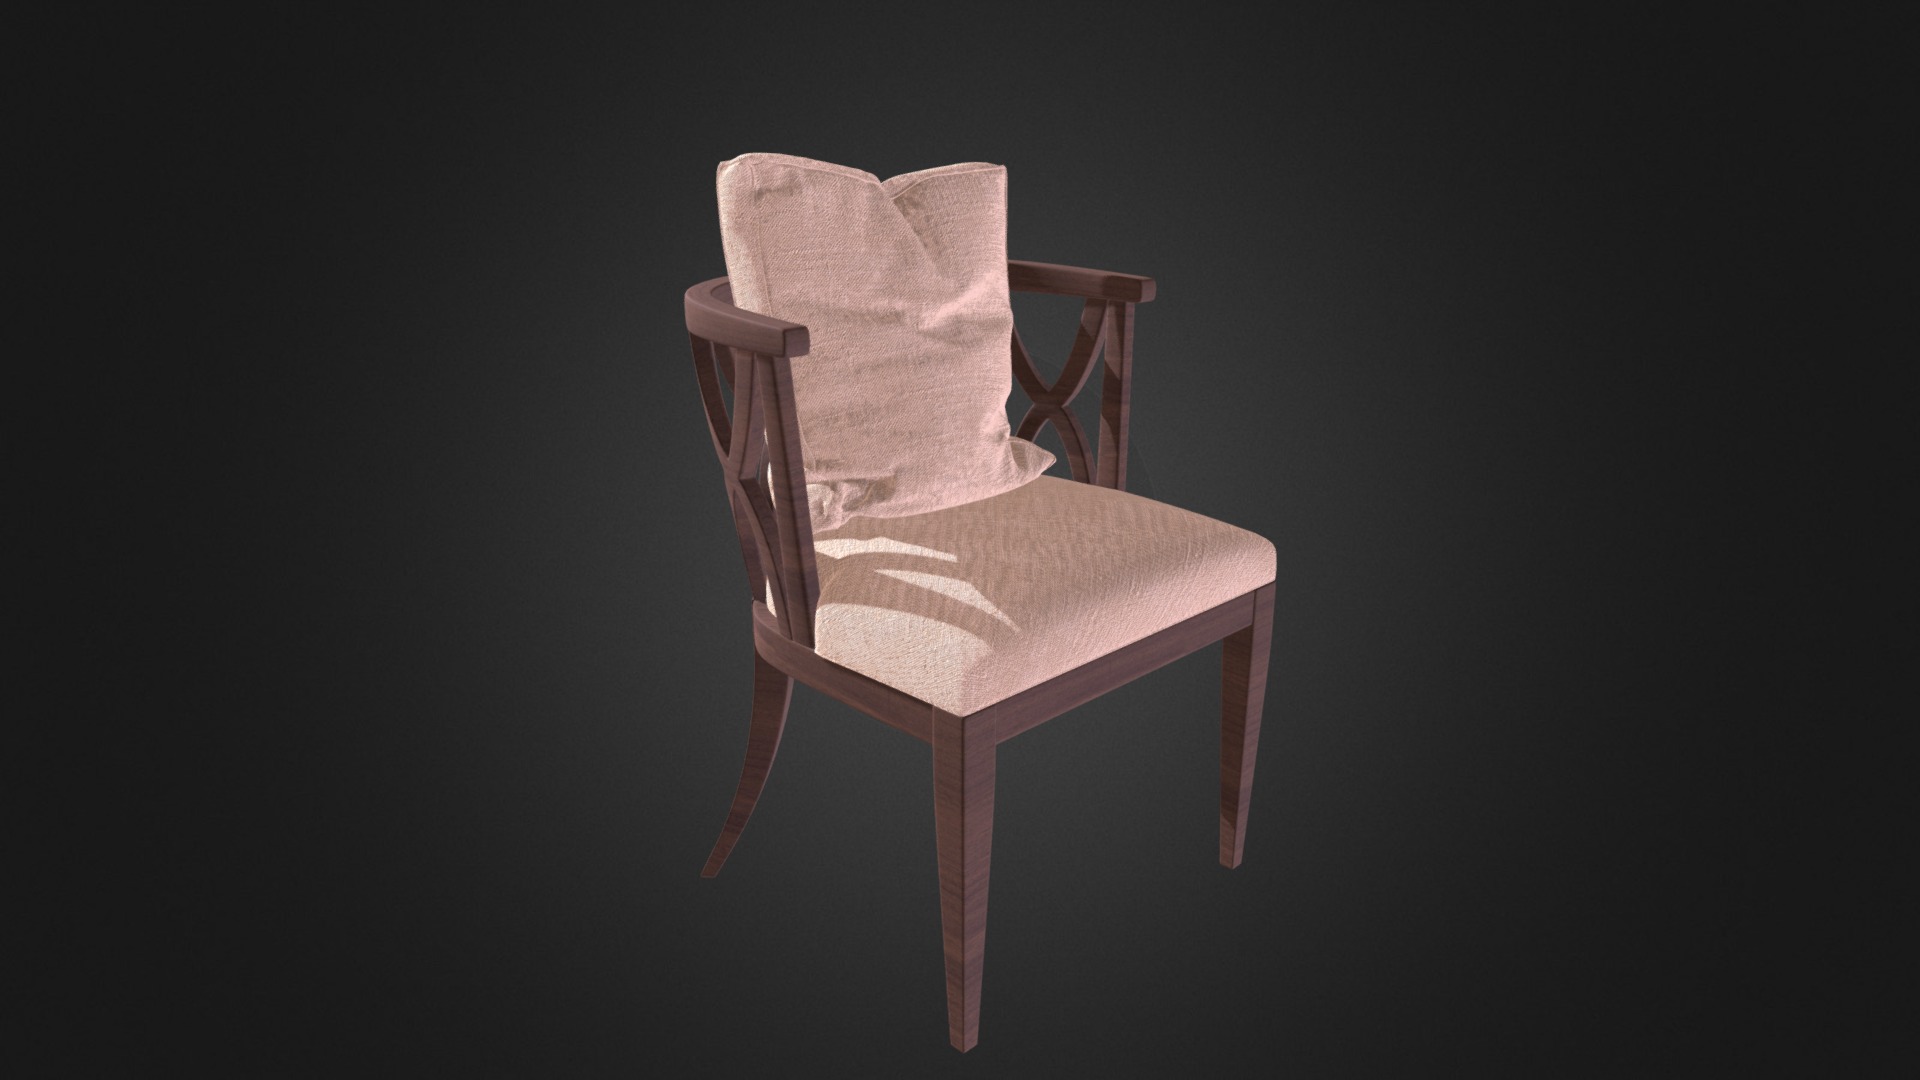 3D model Wooden Chair with Fabric Seat and Pillow - This is a 3D model of the Wooden Chair with Fabric Seat and Pillow. The 3D model is about a chair with a cushion.